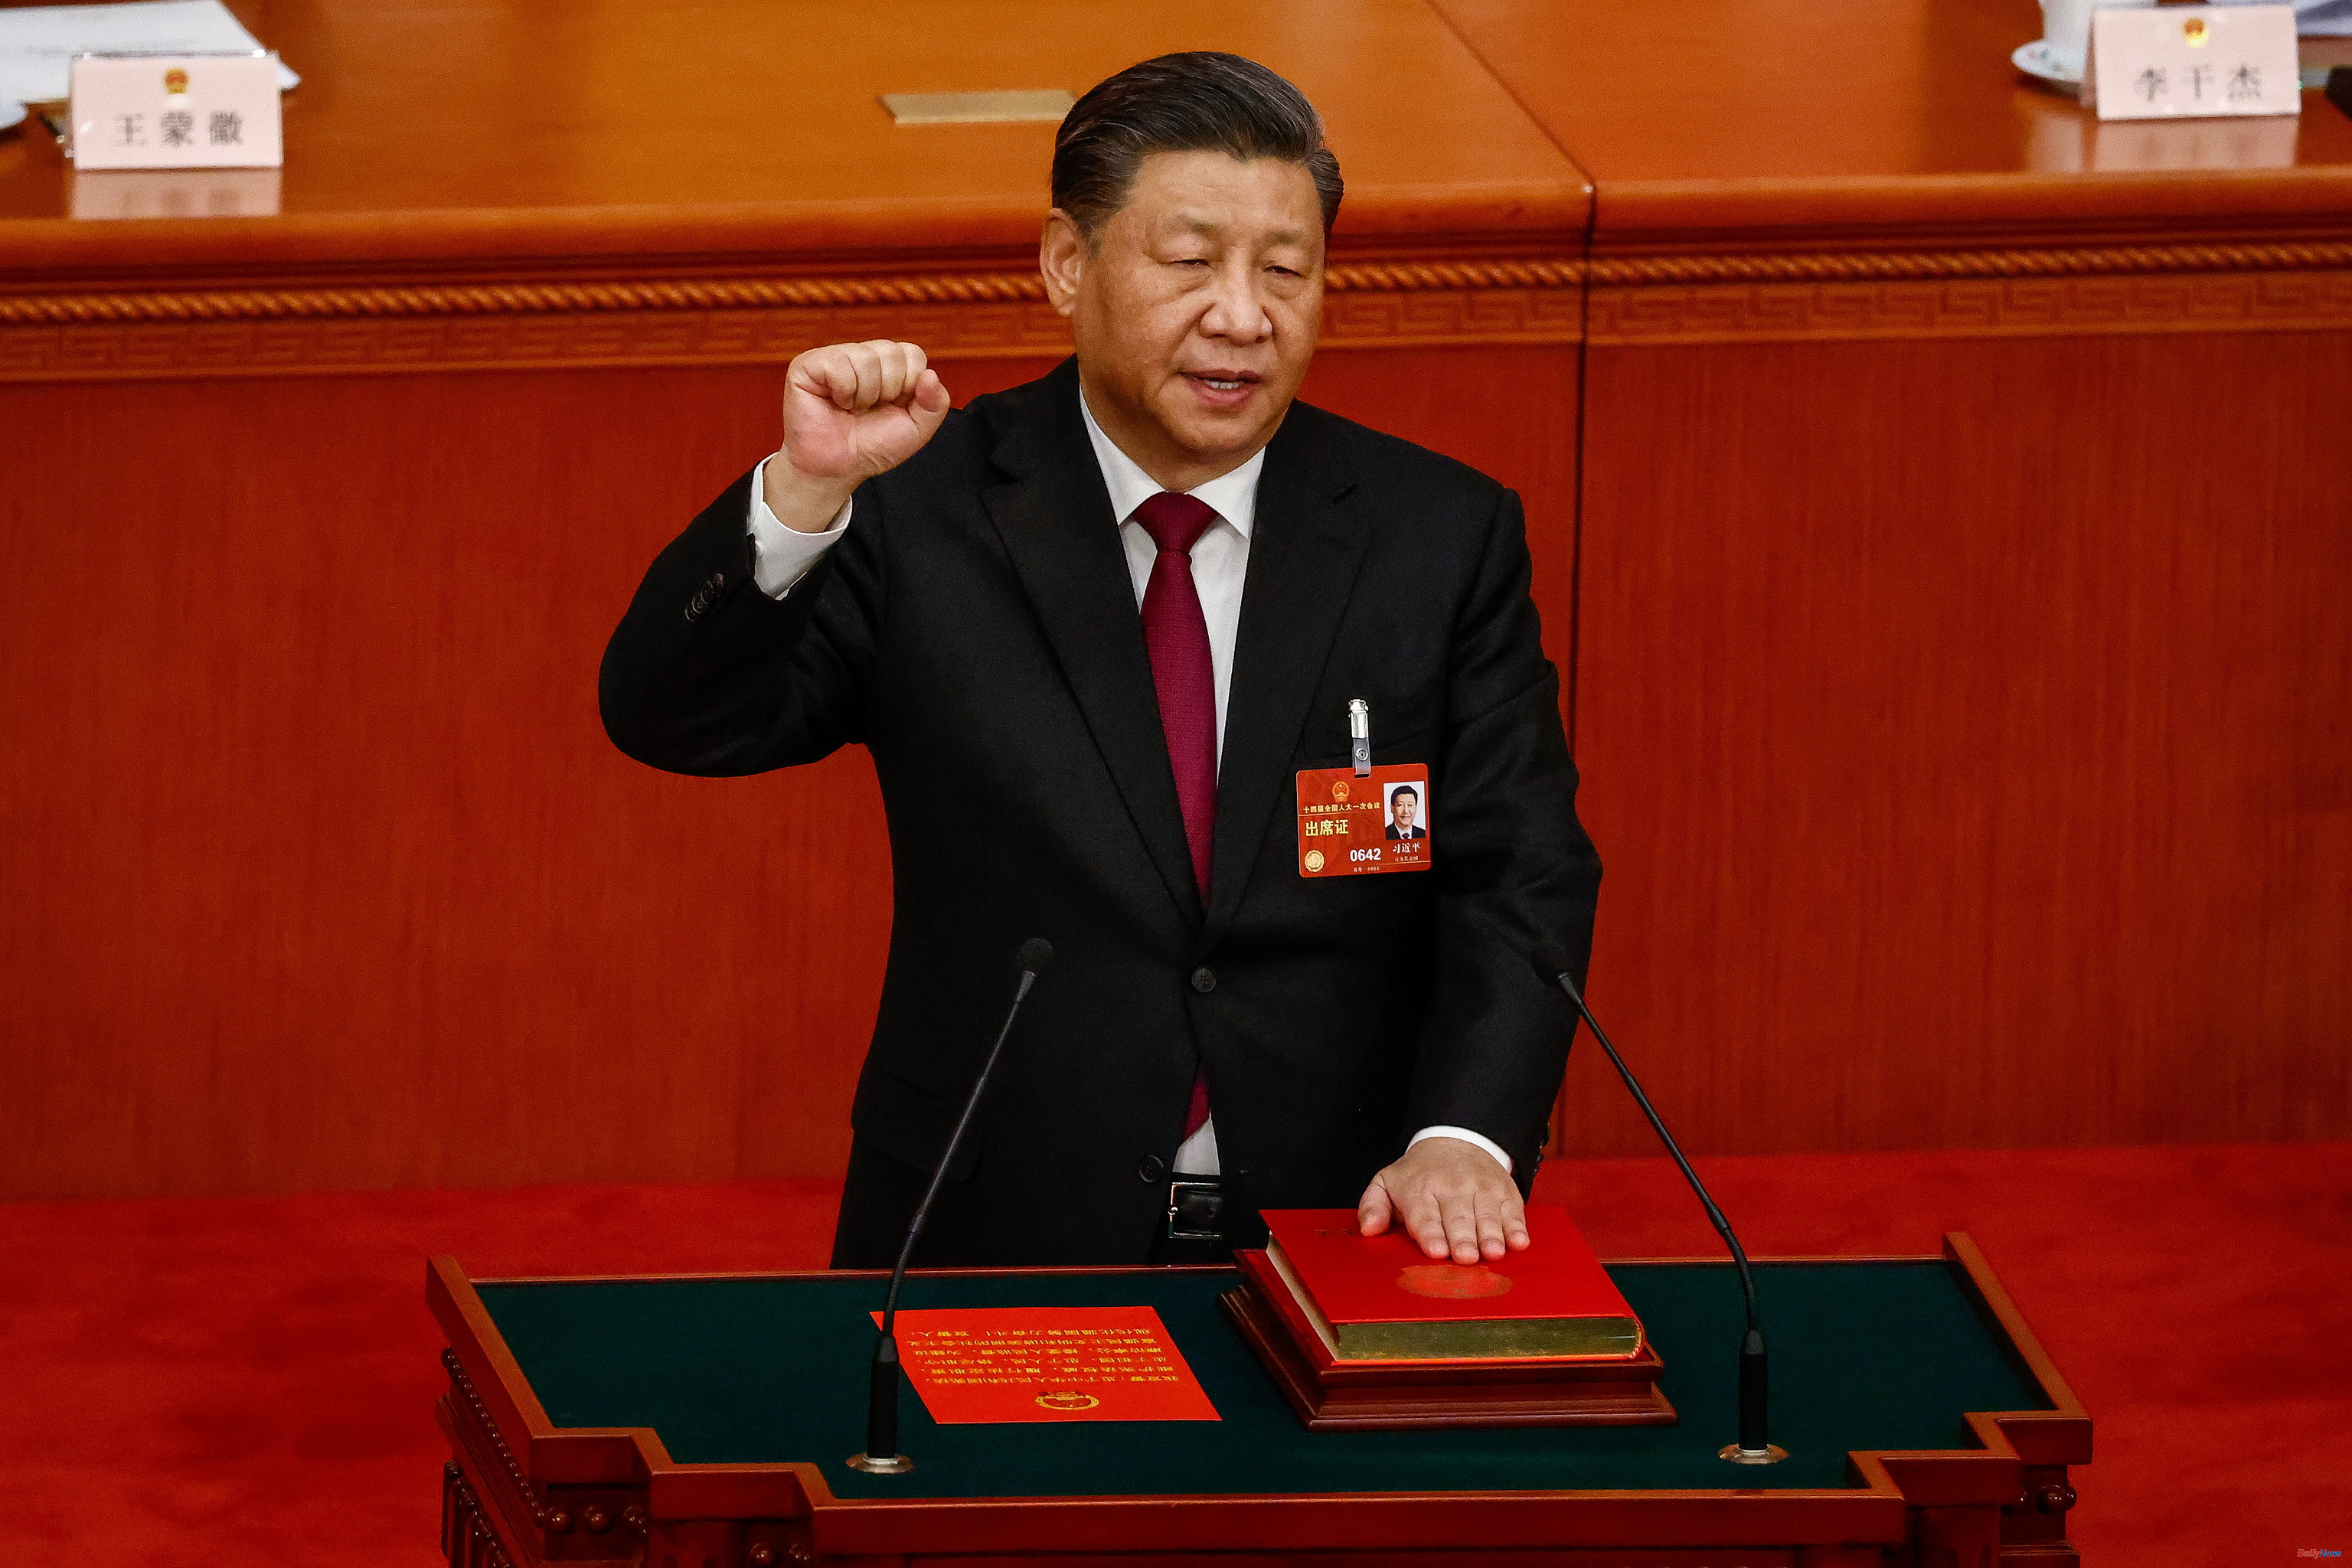 China All power to Xi Jinping: Elected President of China (again)